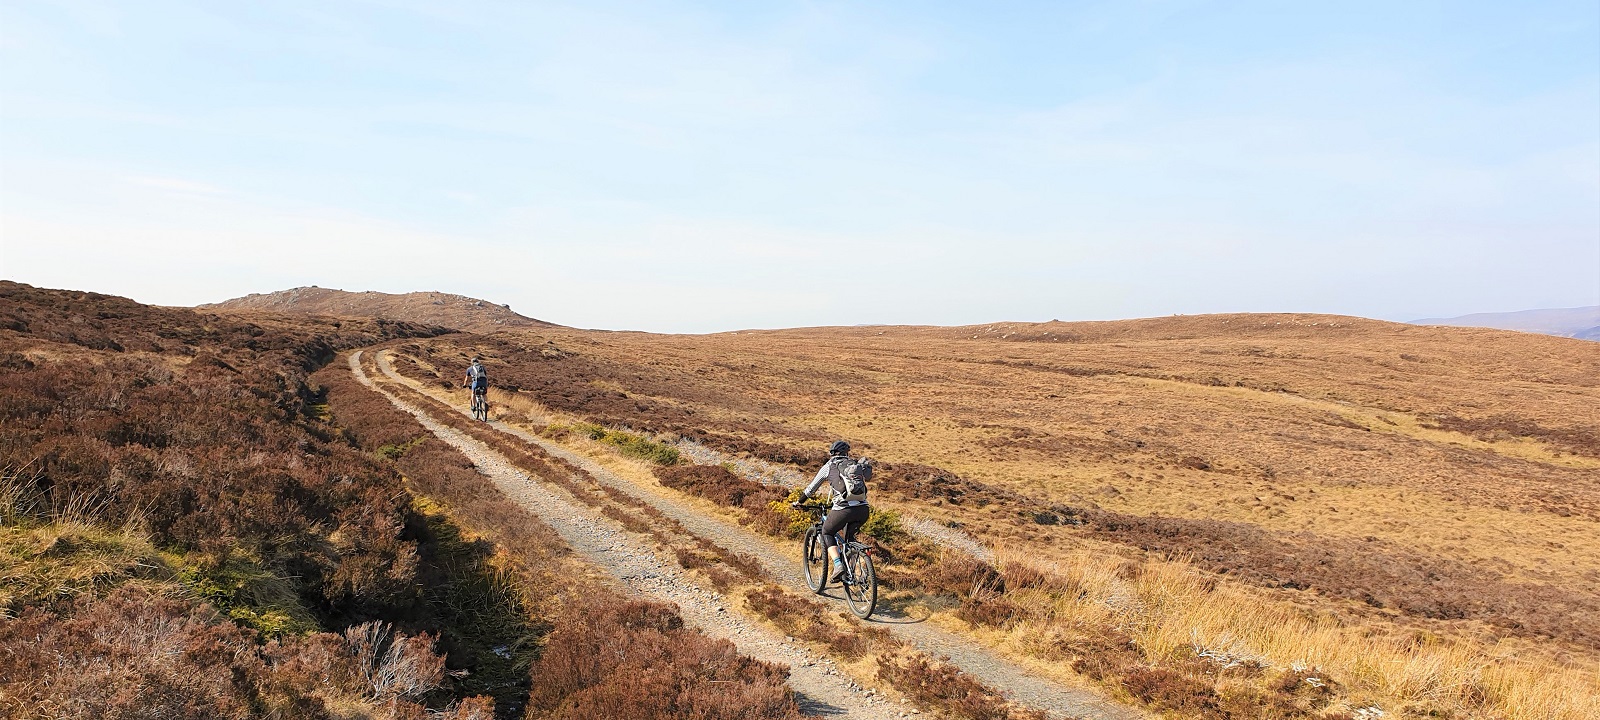 Photos from our Remote Highlands Cycling Holiday